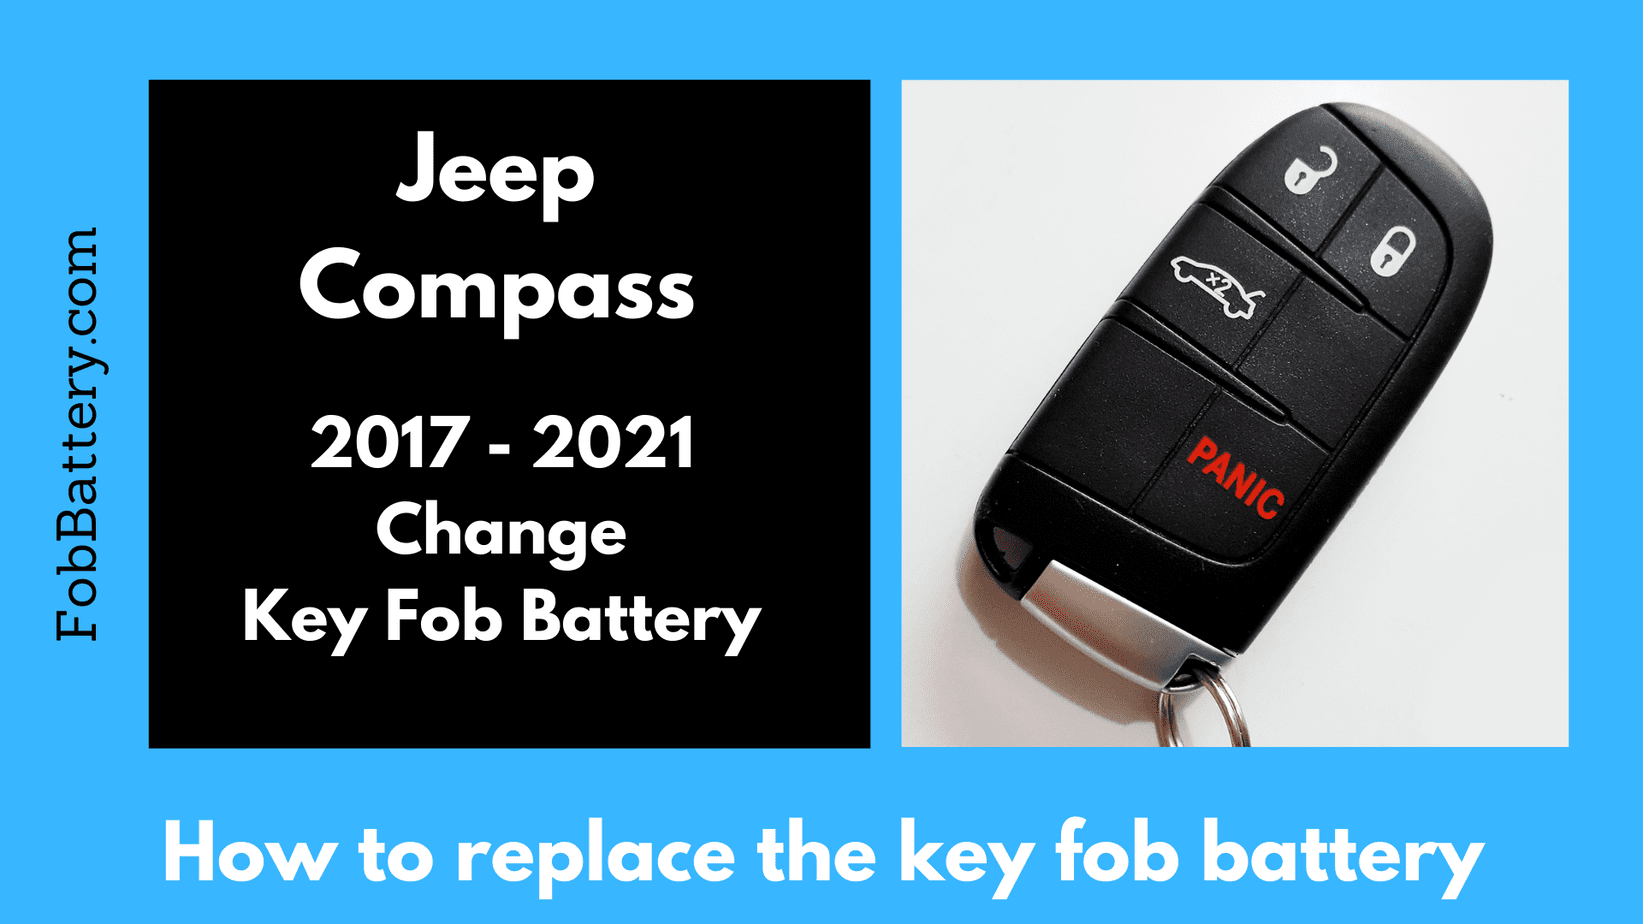 Jeep Compass key fob battery replacement